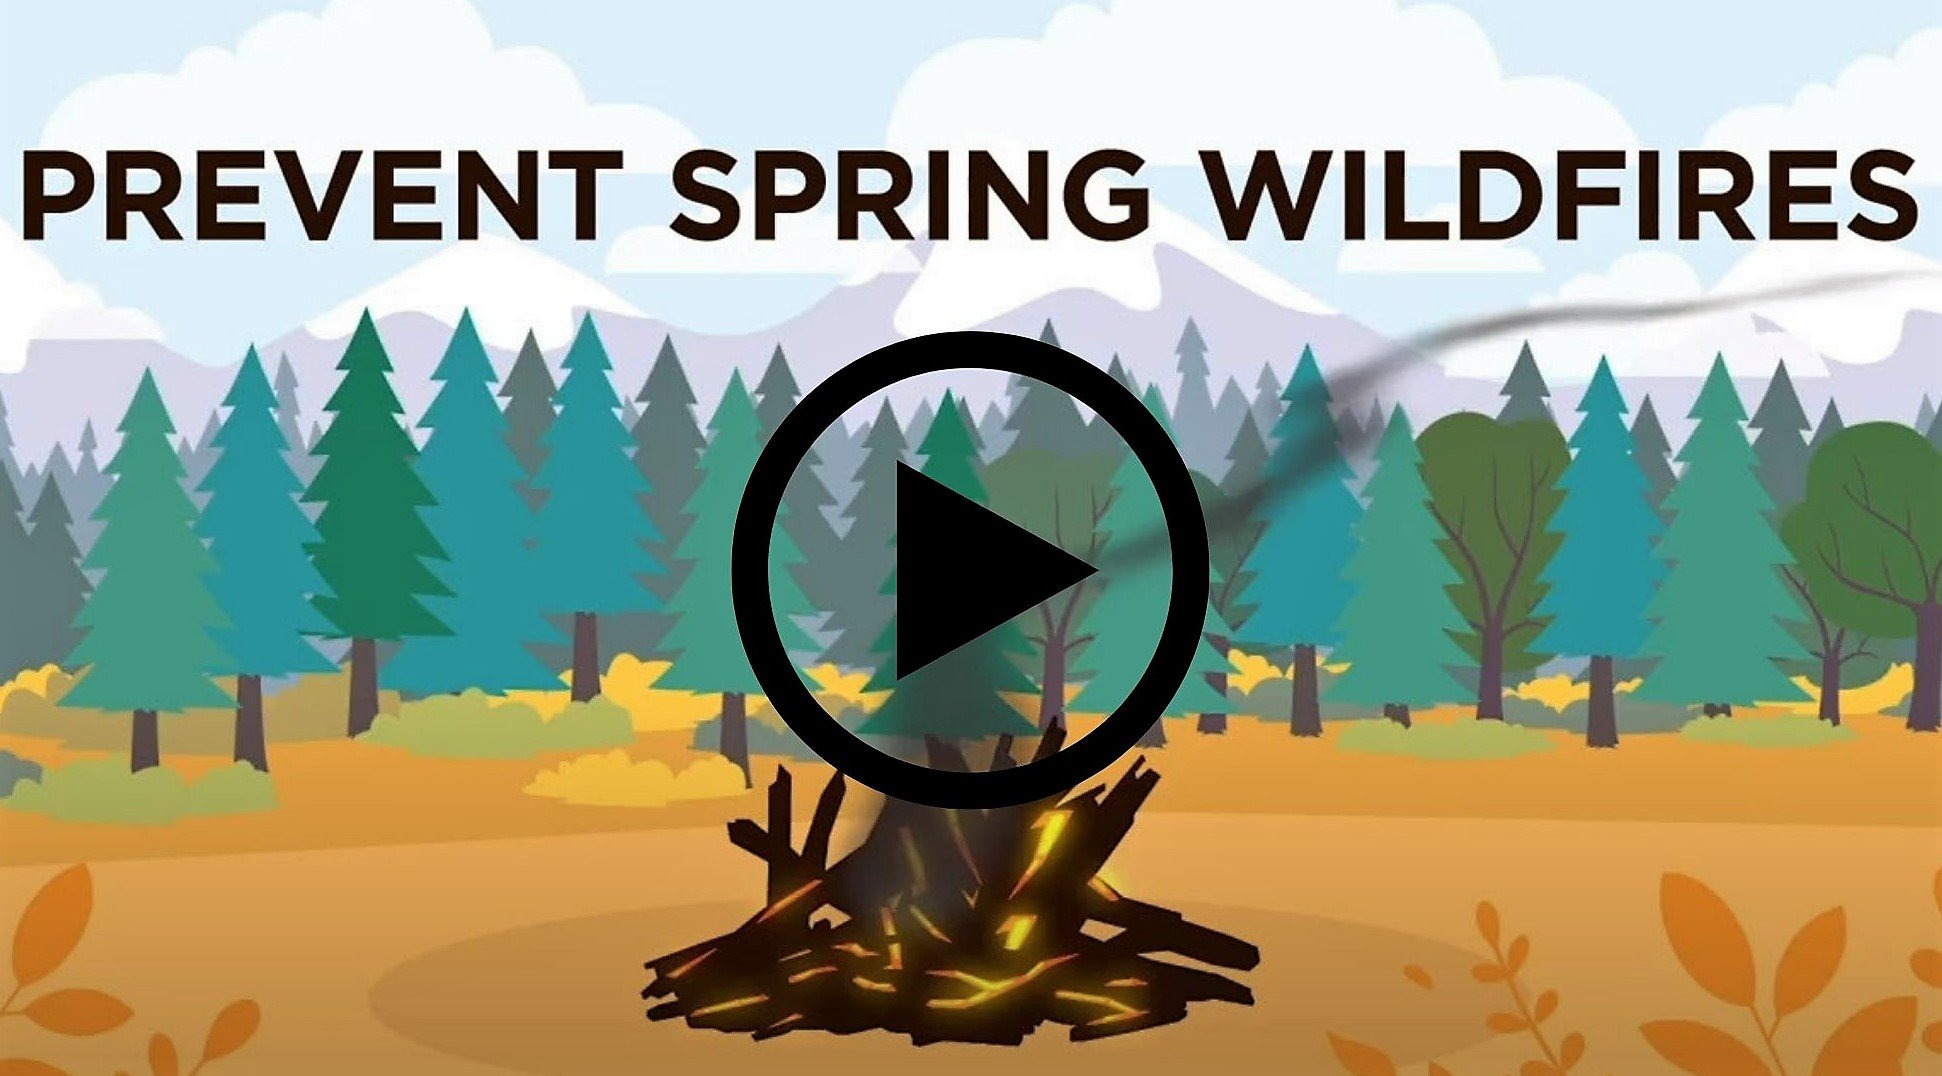 Prevent Spring Wildfires